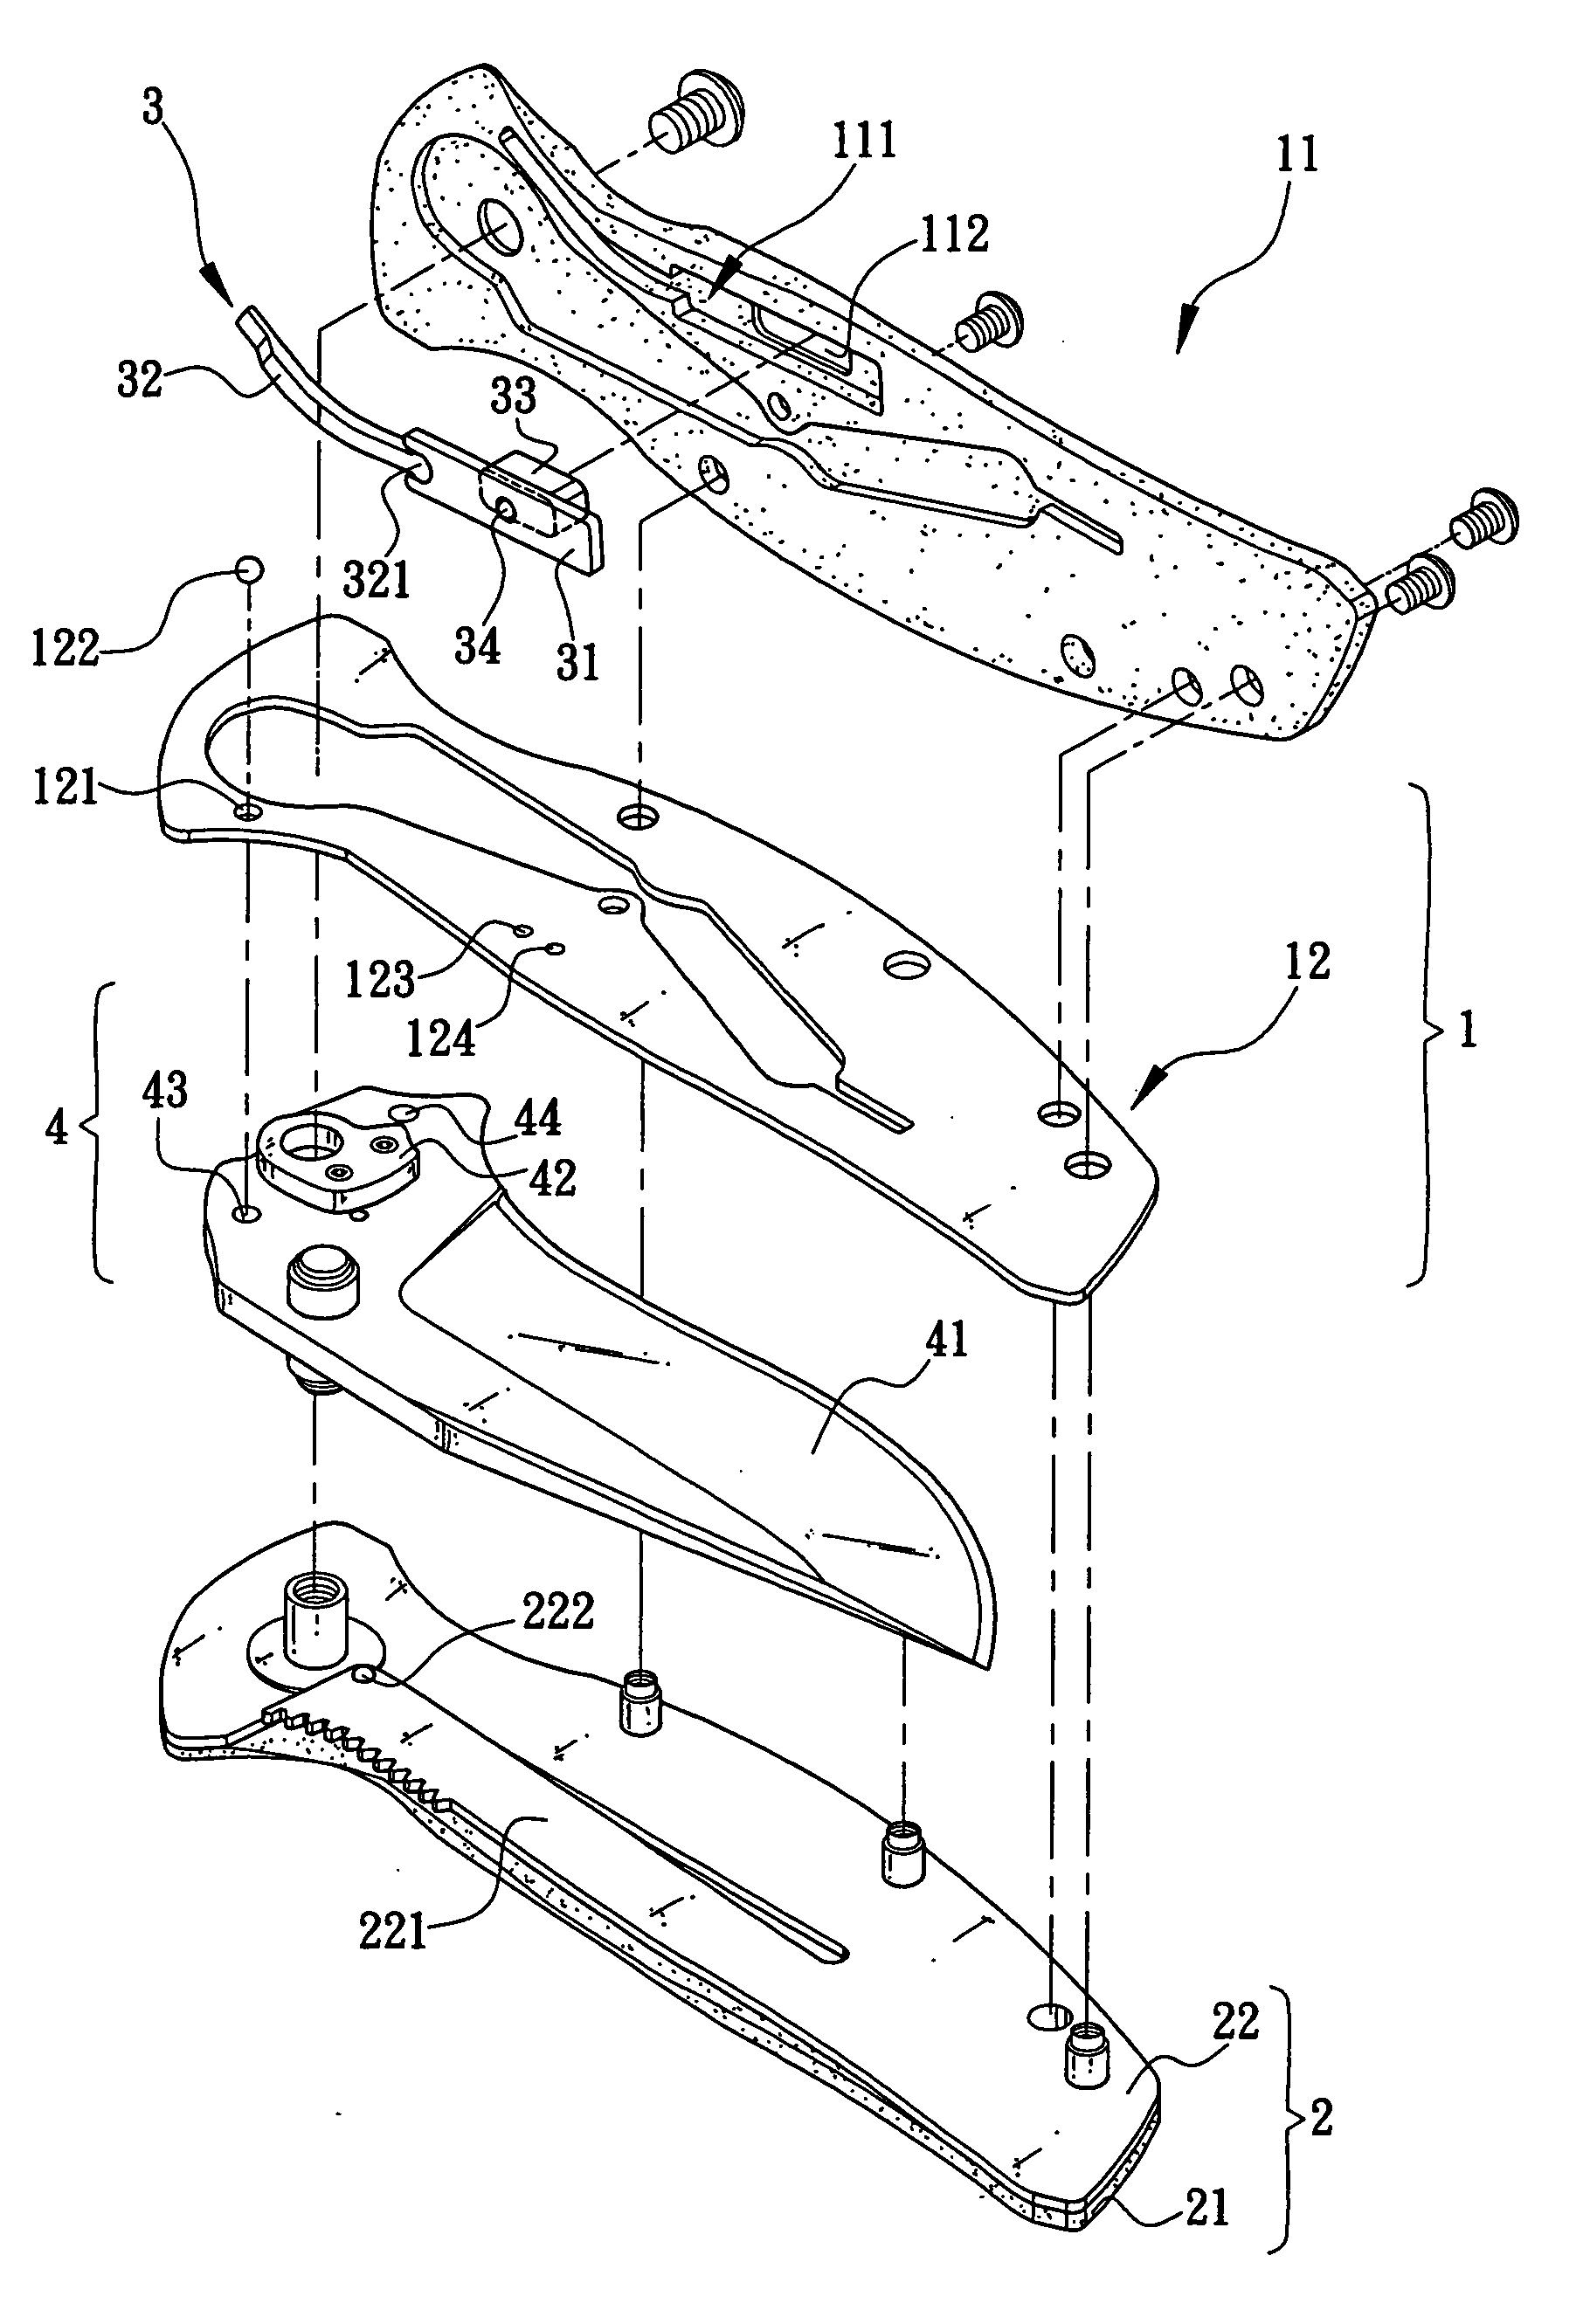 Folding knife assembly with positionable blade